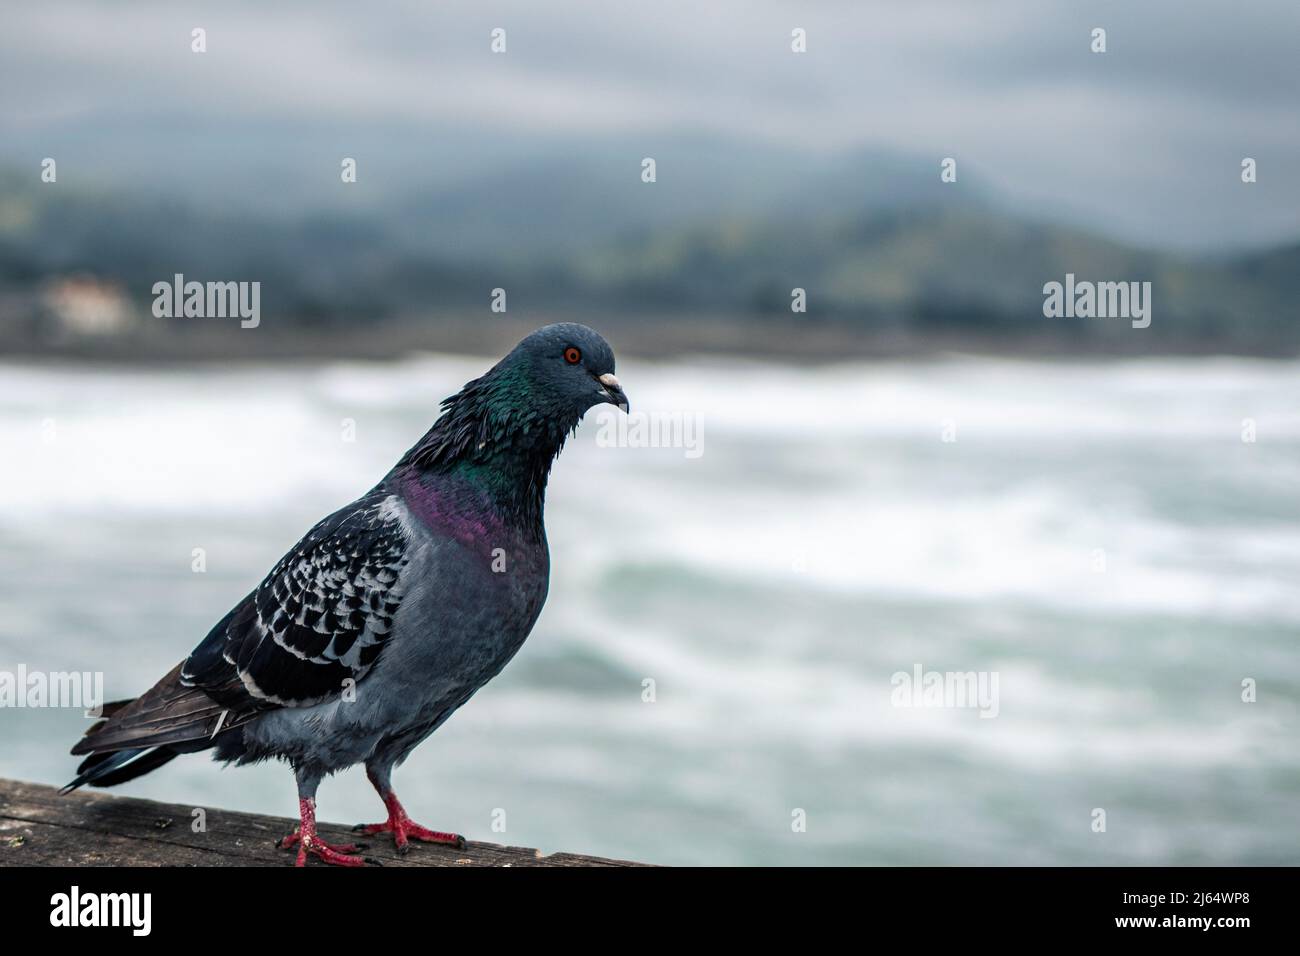 Pigeon perched on the railing of the Pacifica Pier Stock Photo